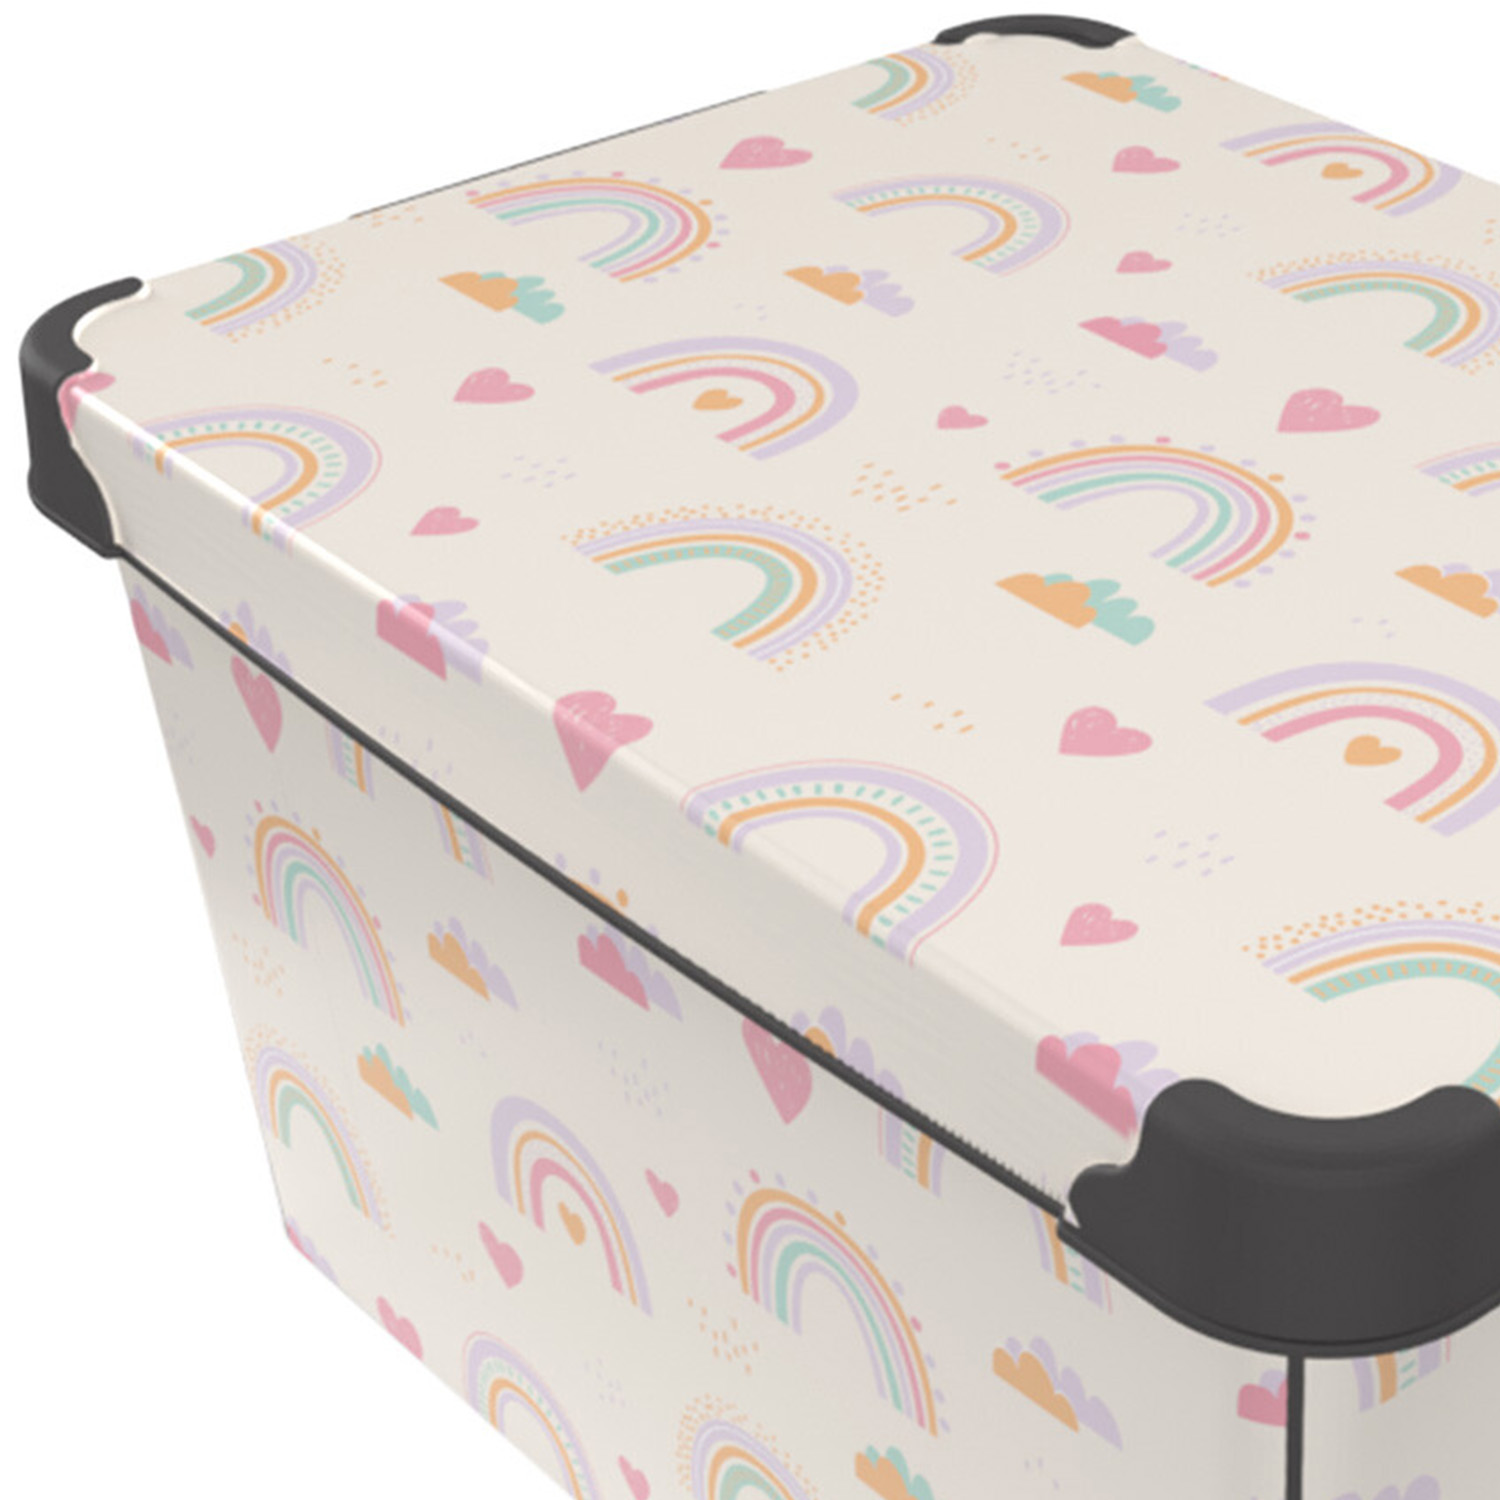 17L Rainbow Patterned Storage Box with Lid Image 3